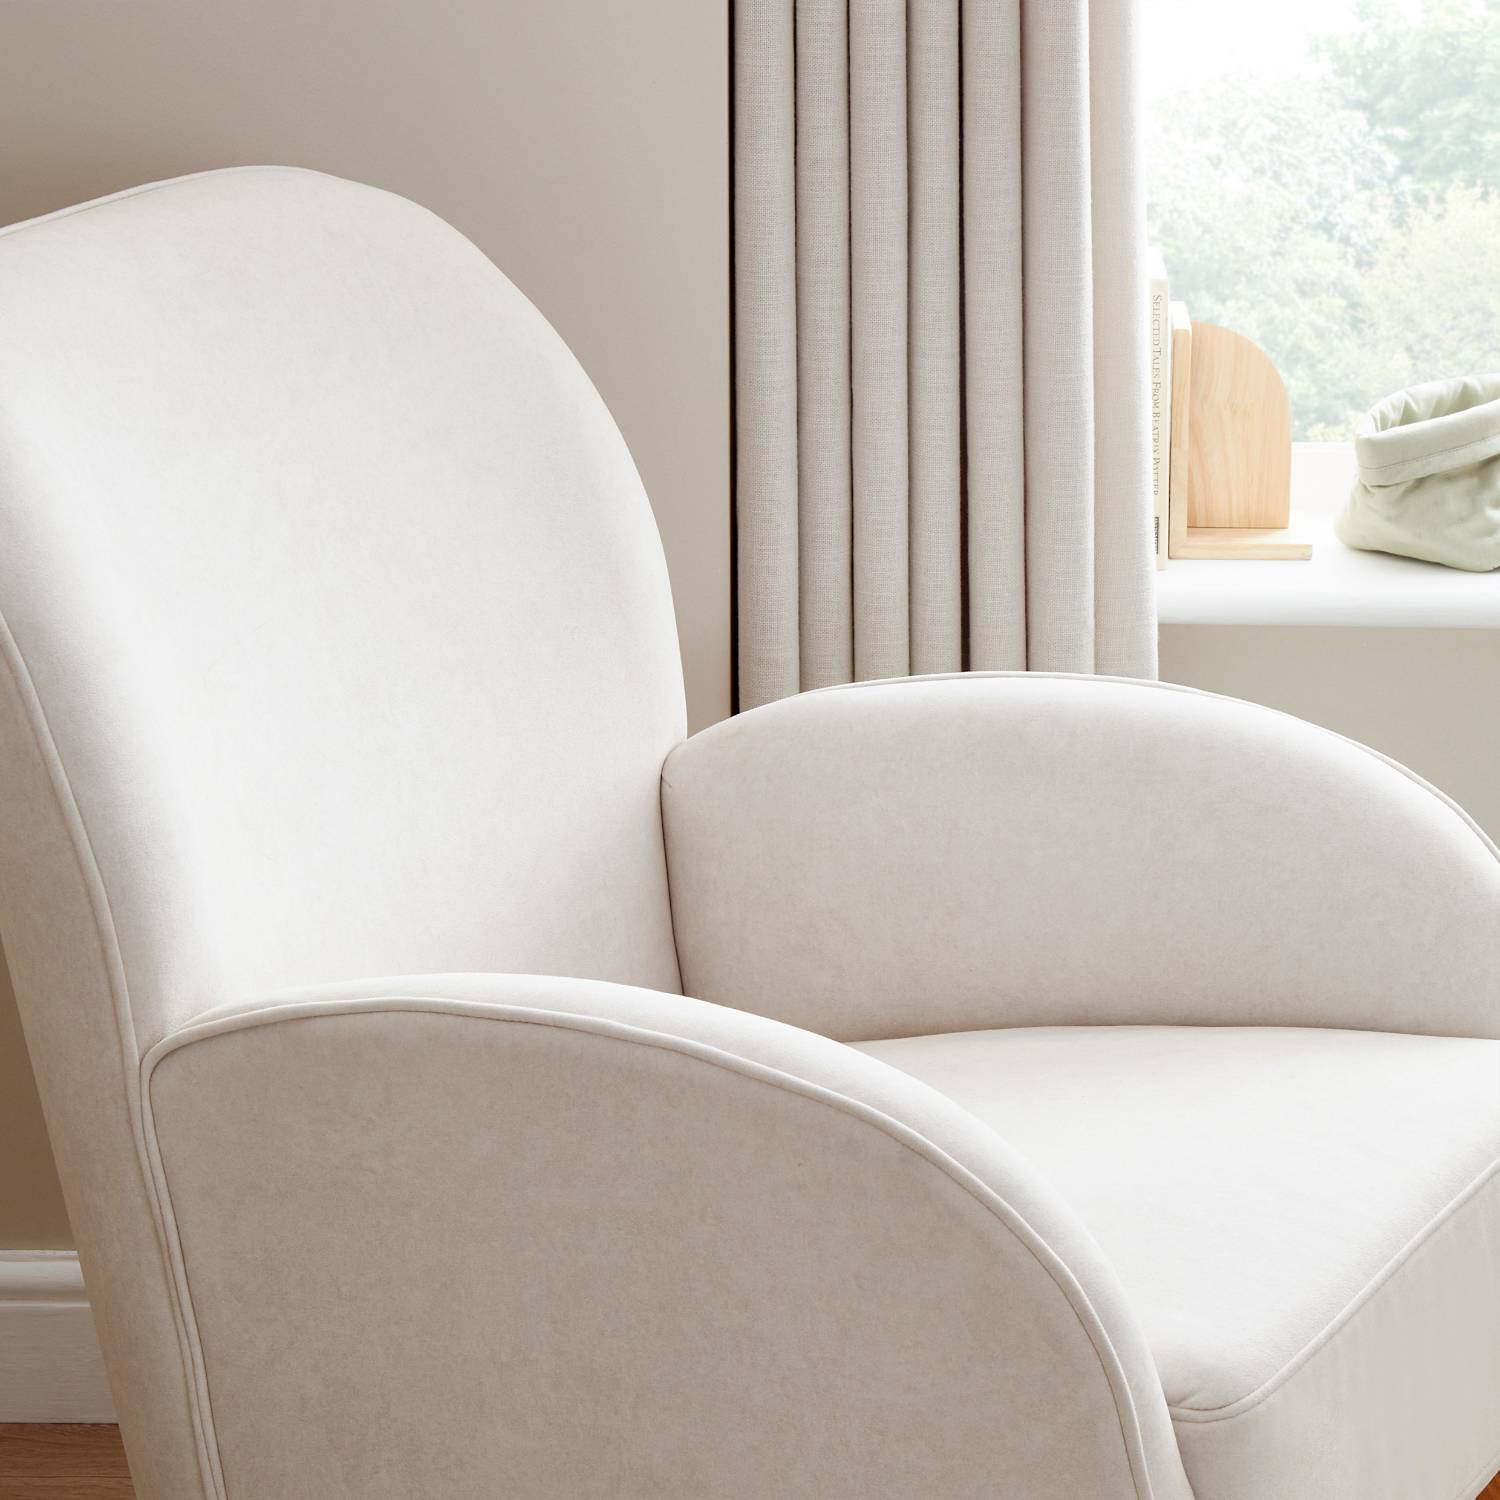 A close-up macro shot of the Babymore Freya Nursing Chair showing its curved ergonomic design and supportive armrests in a nursery room.